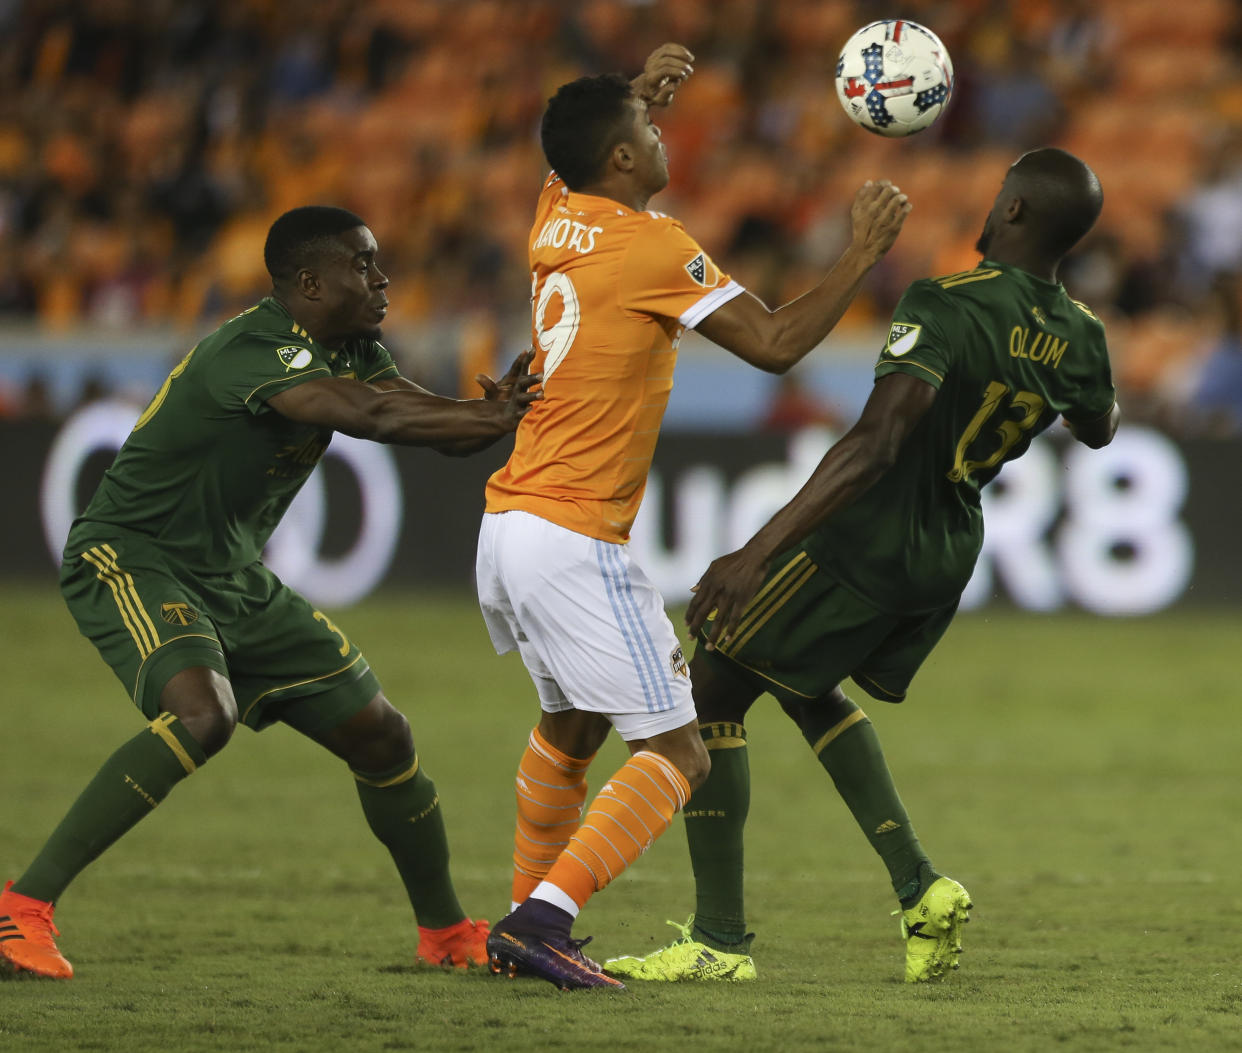 Houston Dynamo forward Mauro Manotas (19) battles with Portland Timbers players Larrys Mabiala (33) and Lawrence Olum (13) for possession of the ball during the MLS Western Conference semifinal soccer match Monday, Oct. 30, 2017, in Houston. (Yi-Chin Lee/Houston Chronicle via AP)